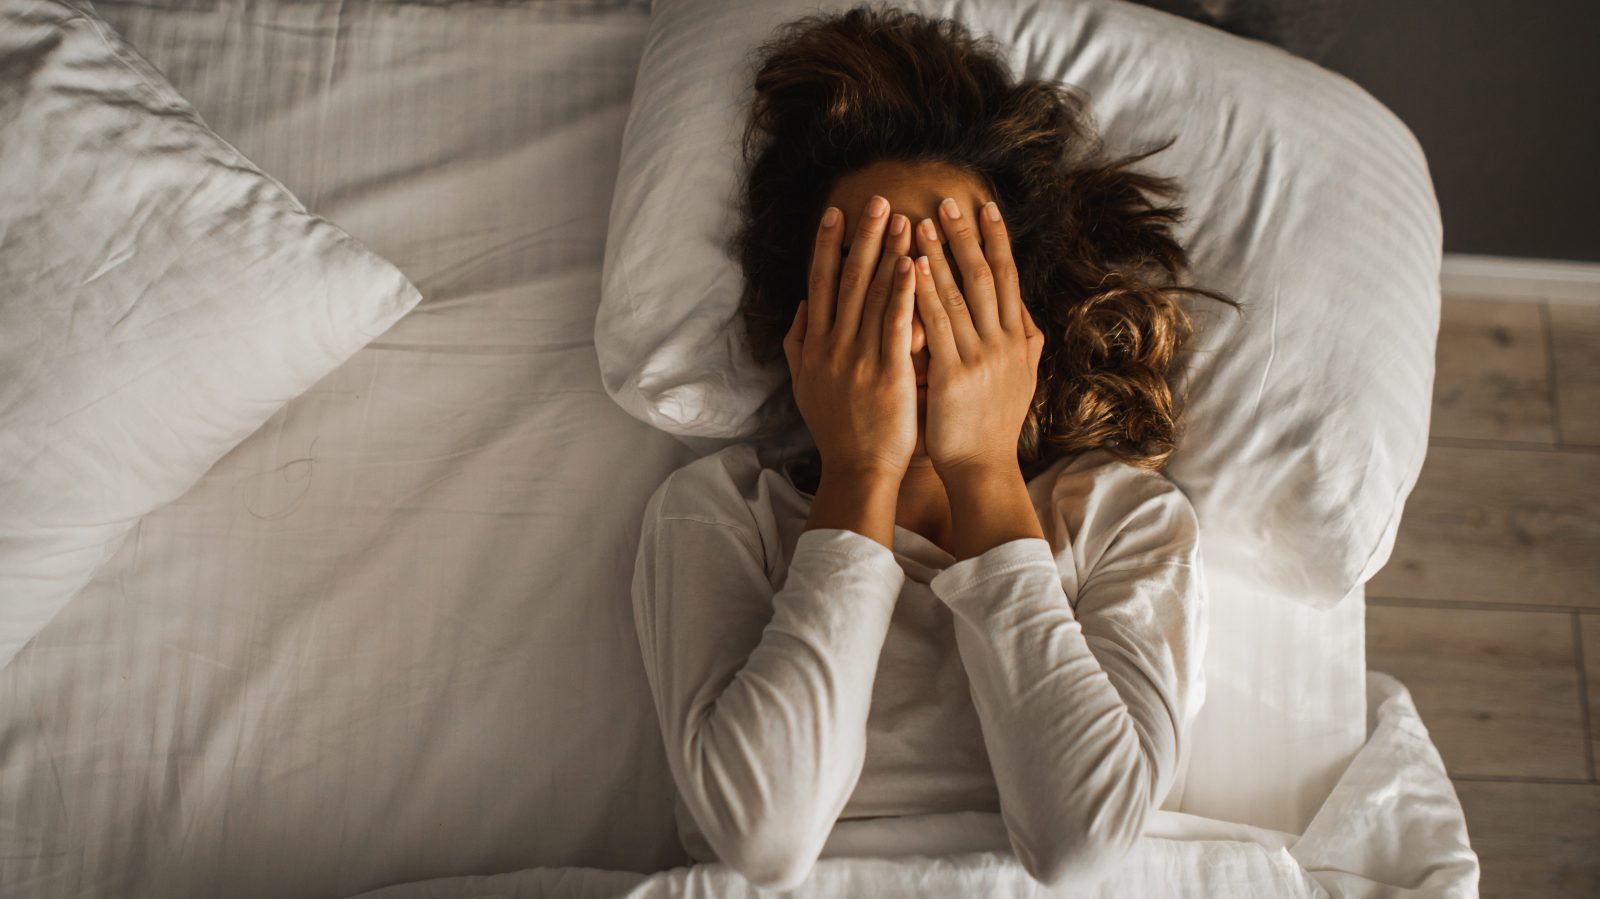 Woman lying in bed hands over face